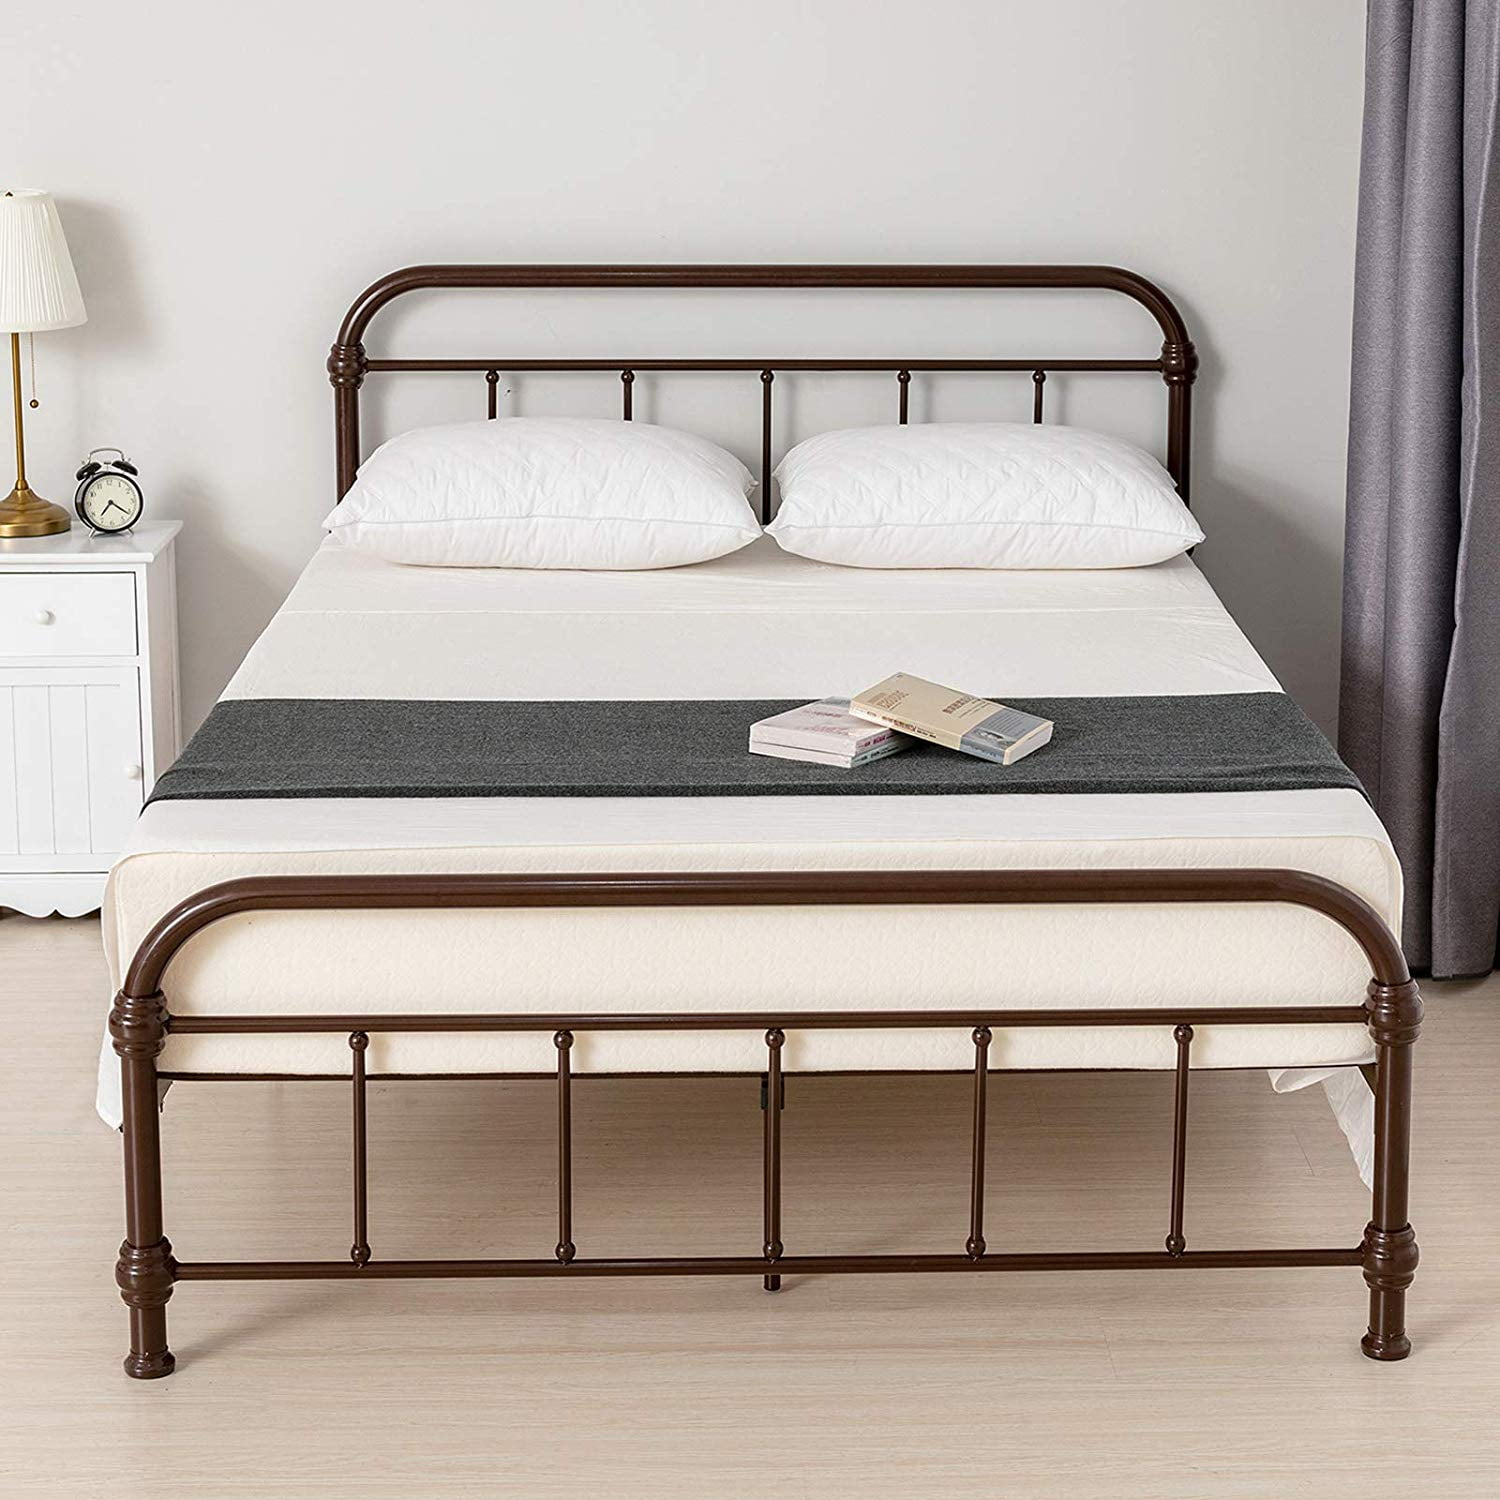 Mecor Bed Full Size Platform Metal Frame, with Vintage Headboard and